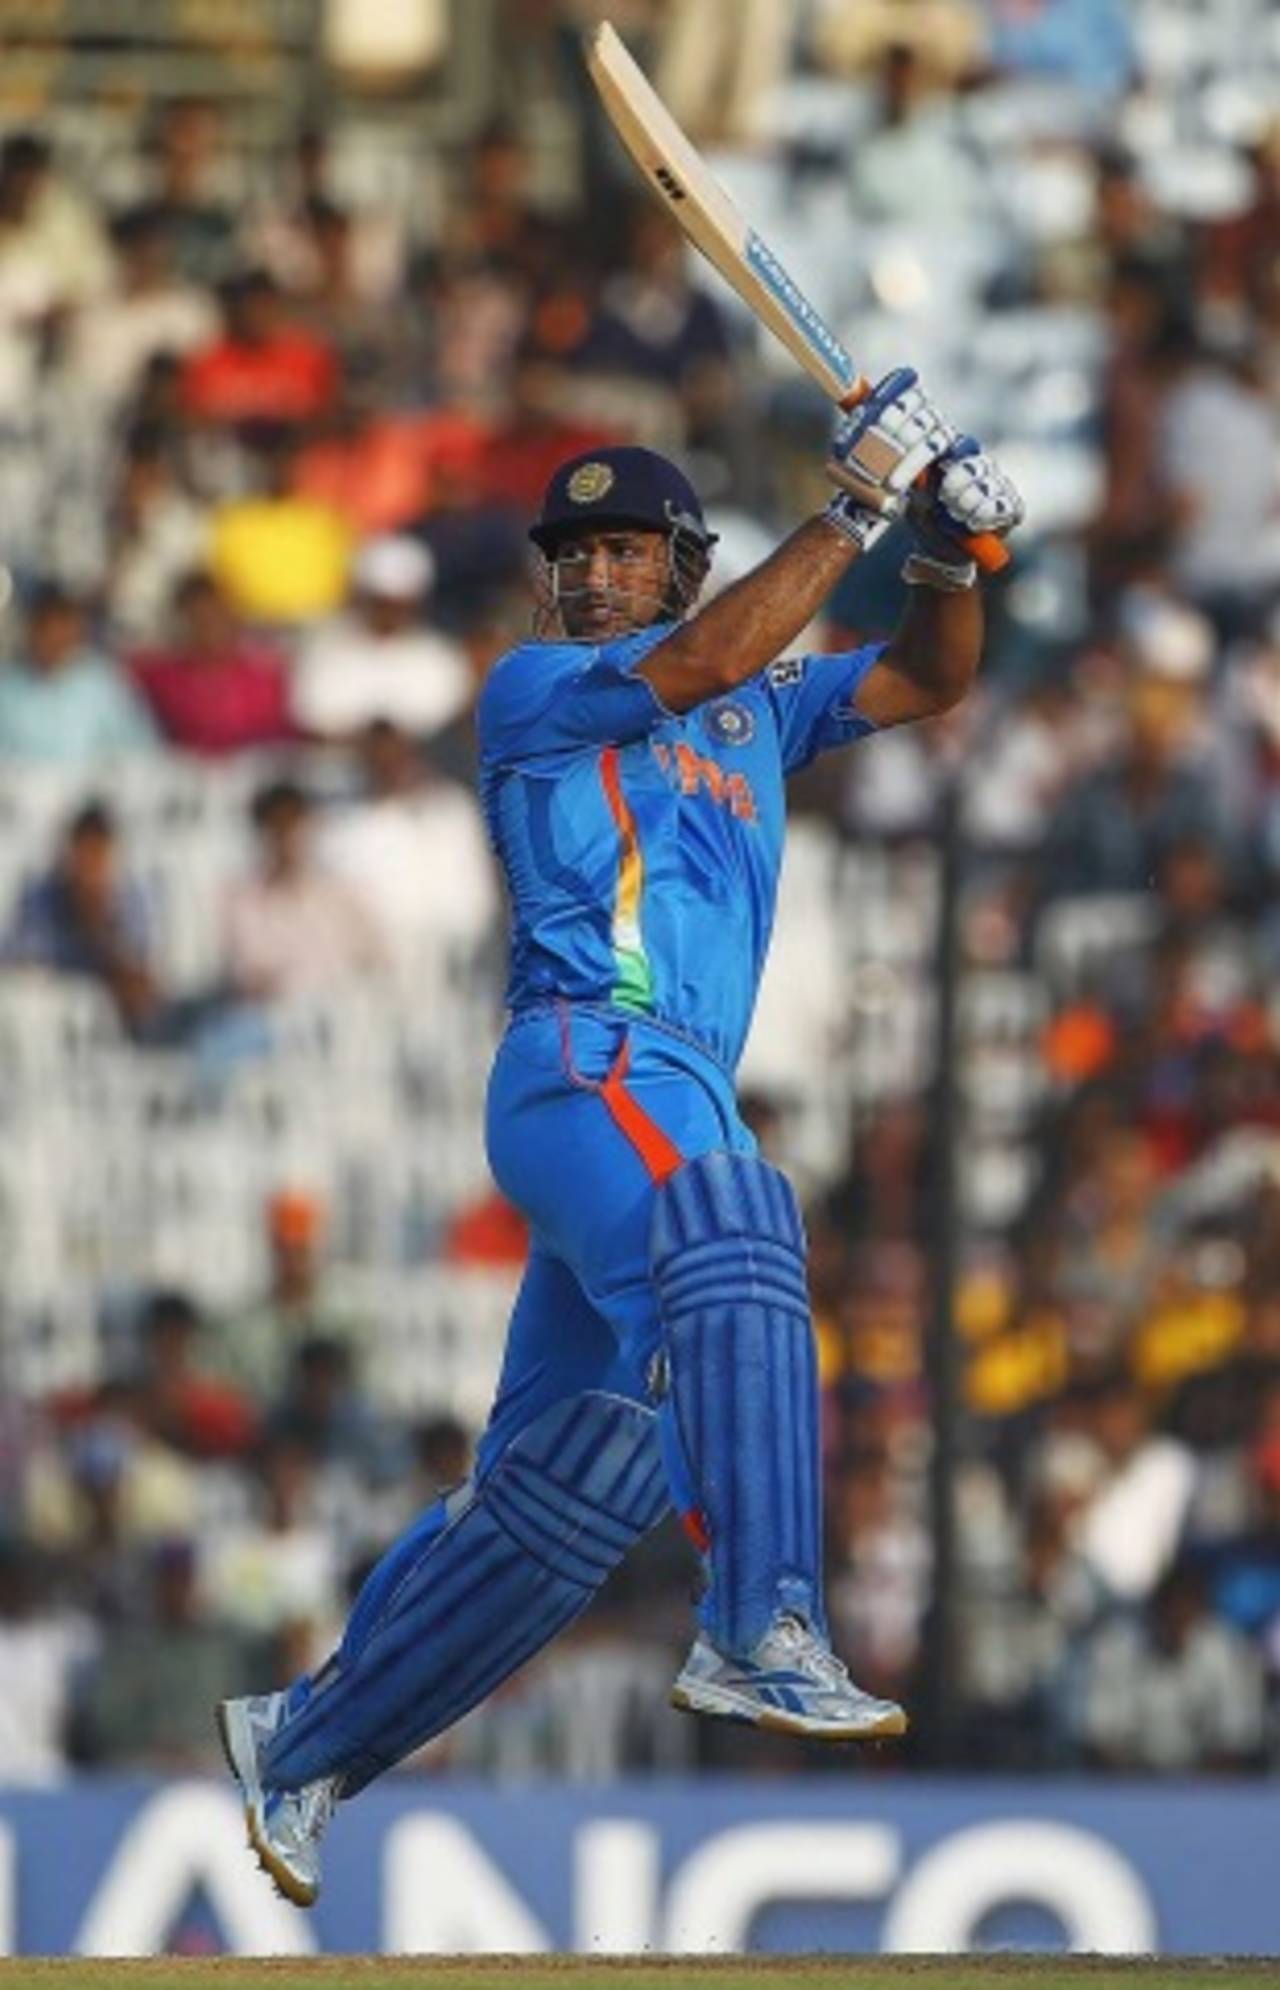 MS Dhoni blazes one over point, India v New Zealand, World Cup 2011 warm-up, Chennai, February 16, 2011